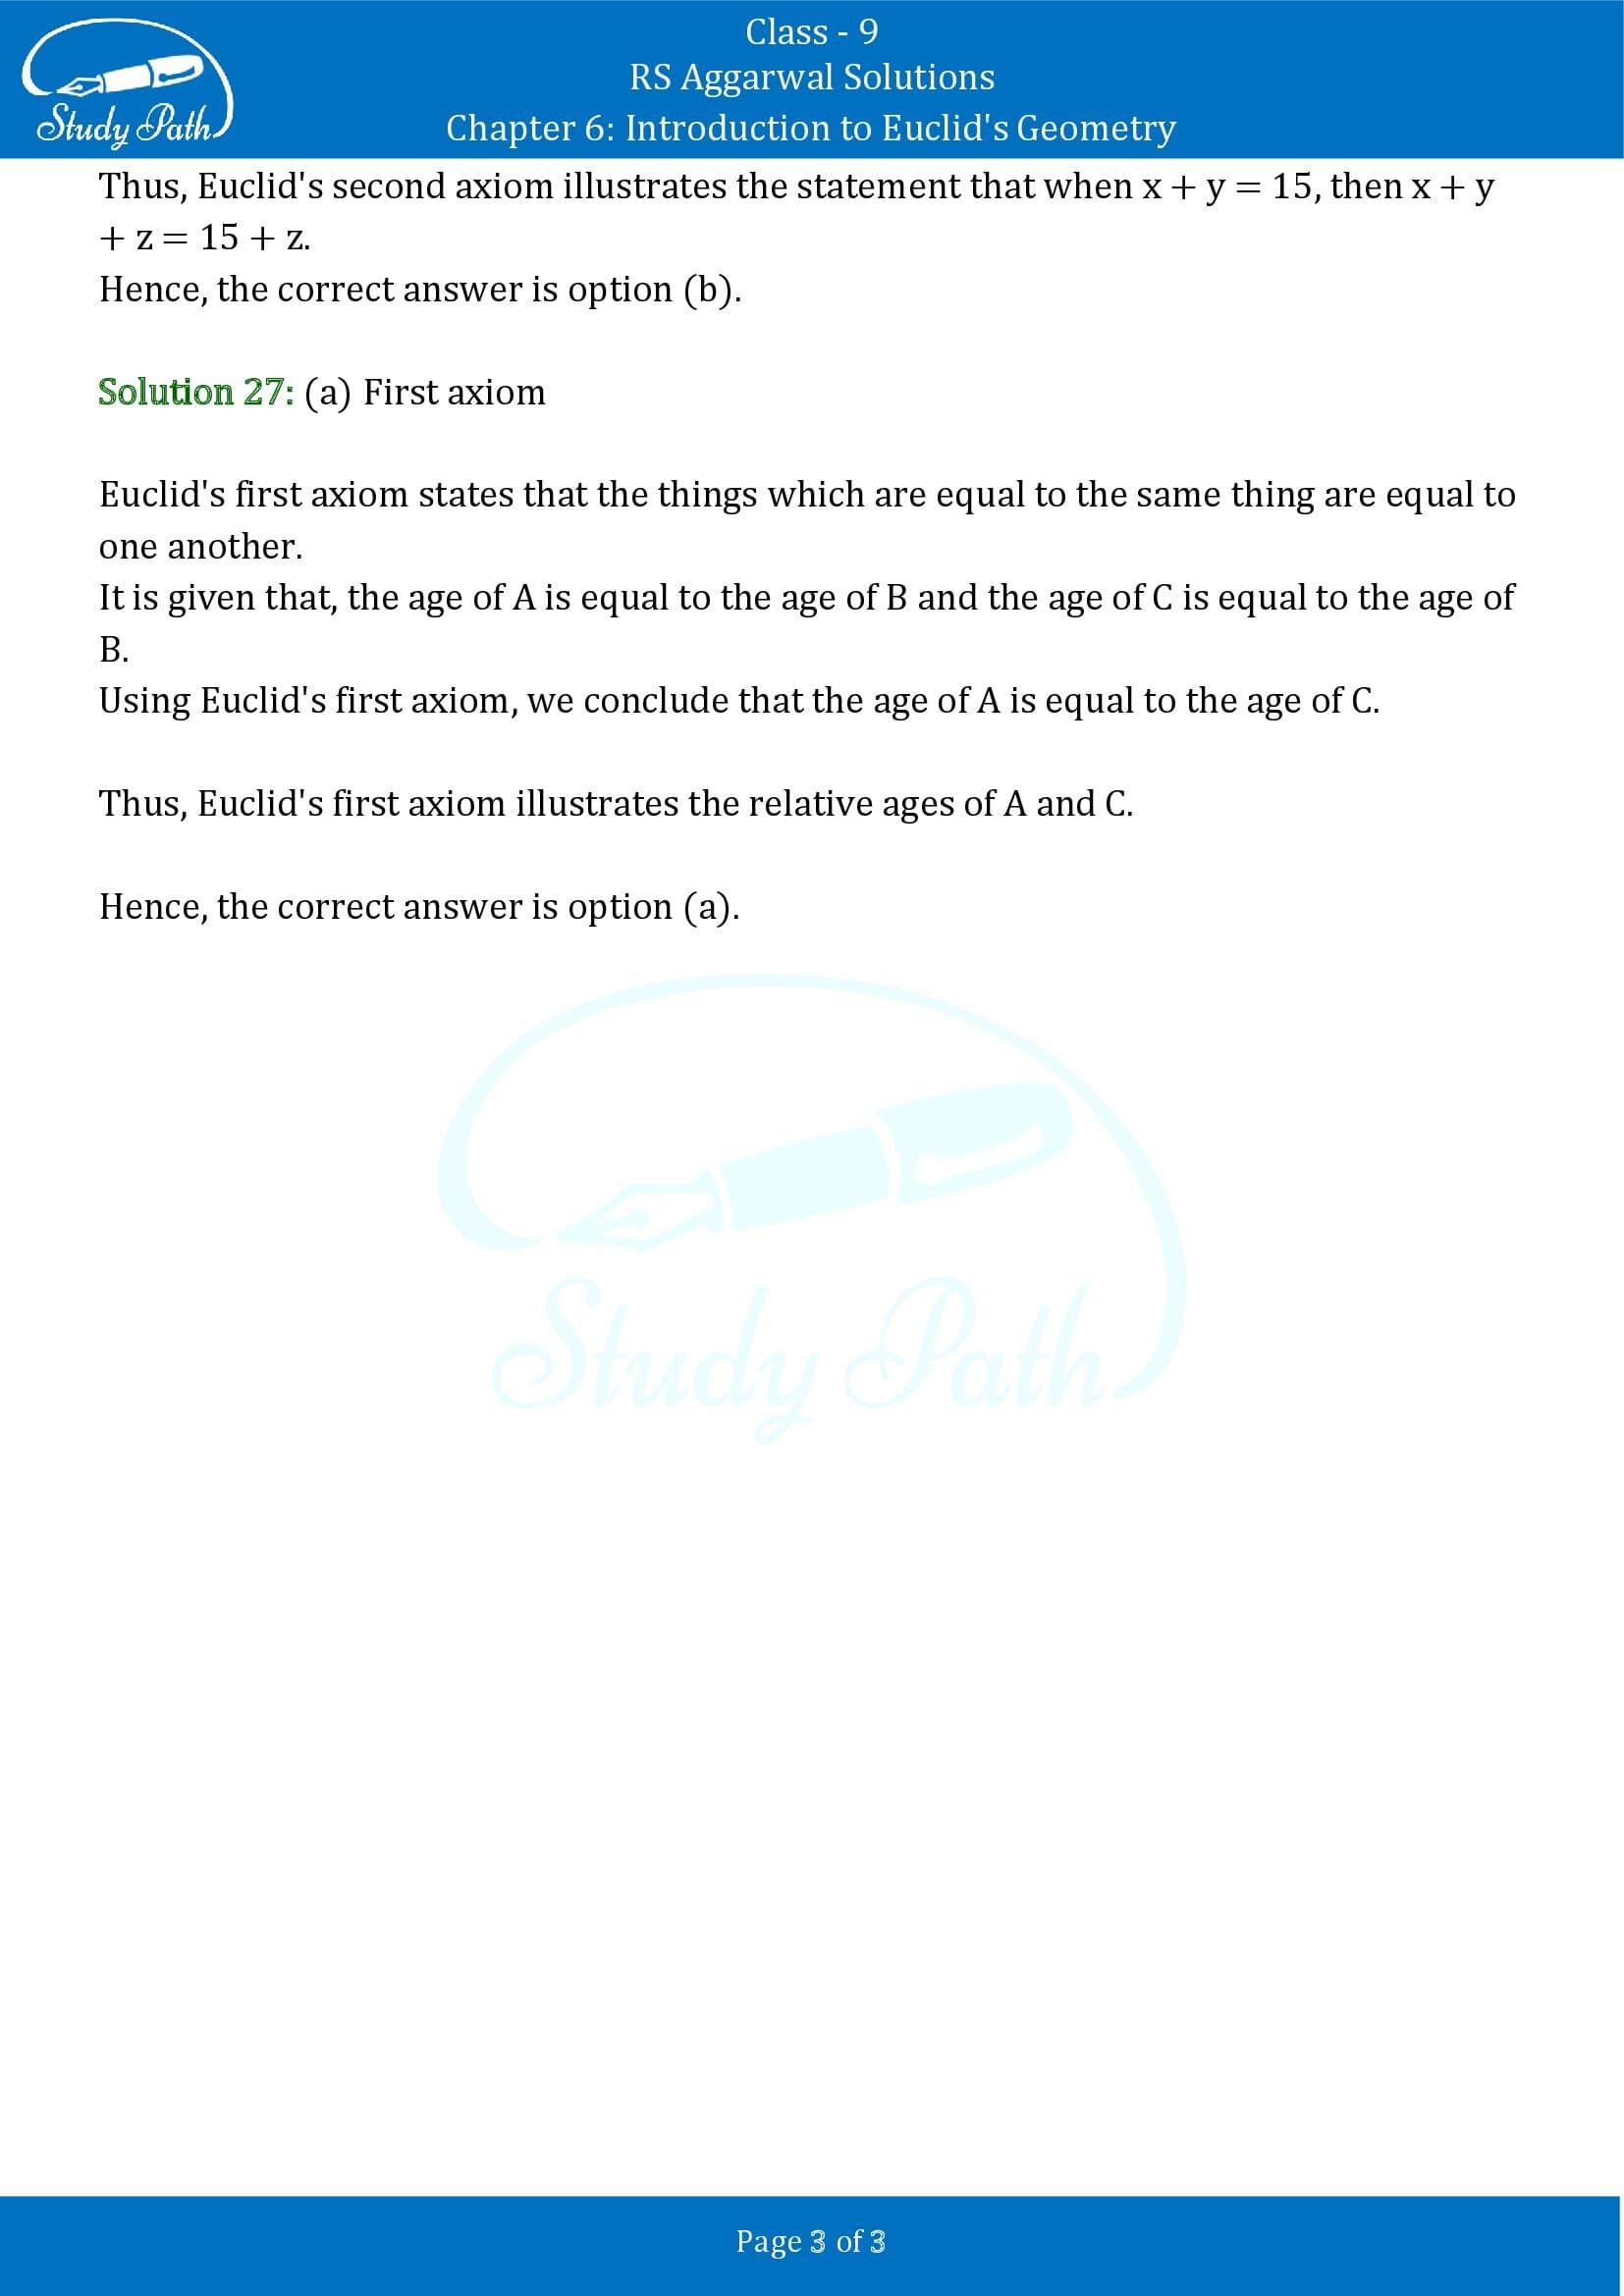 RS Aggarwal Solutions Class 9 Chapter 6 Introduction to Euclids Geometry Multiple Choice Questions MCQs 00003